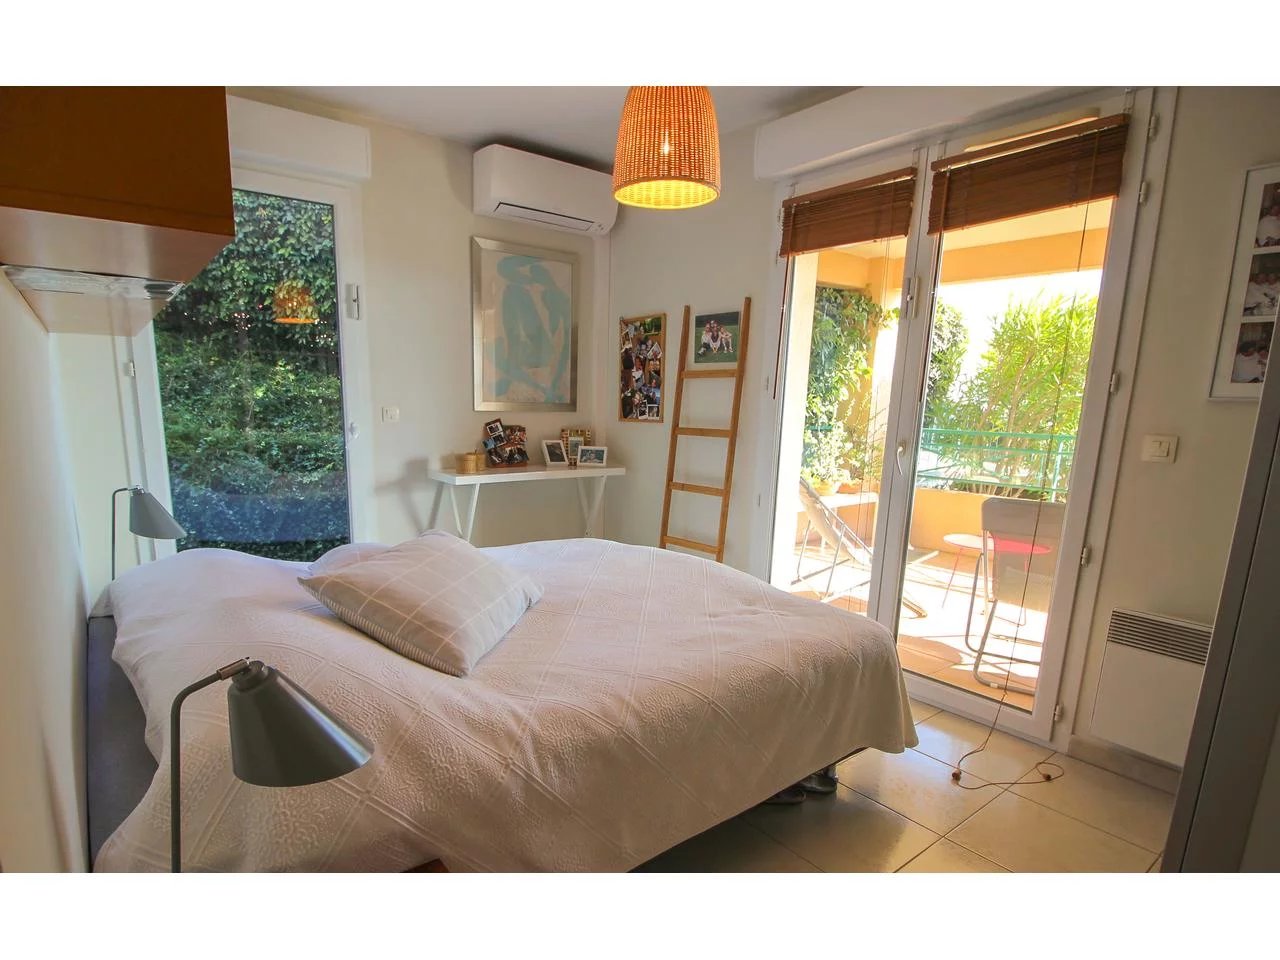 Appartement  4 Rooms 100.4m2  for sale   659 000 €